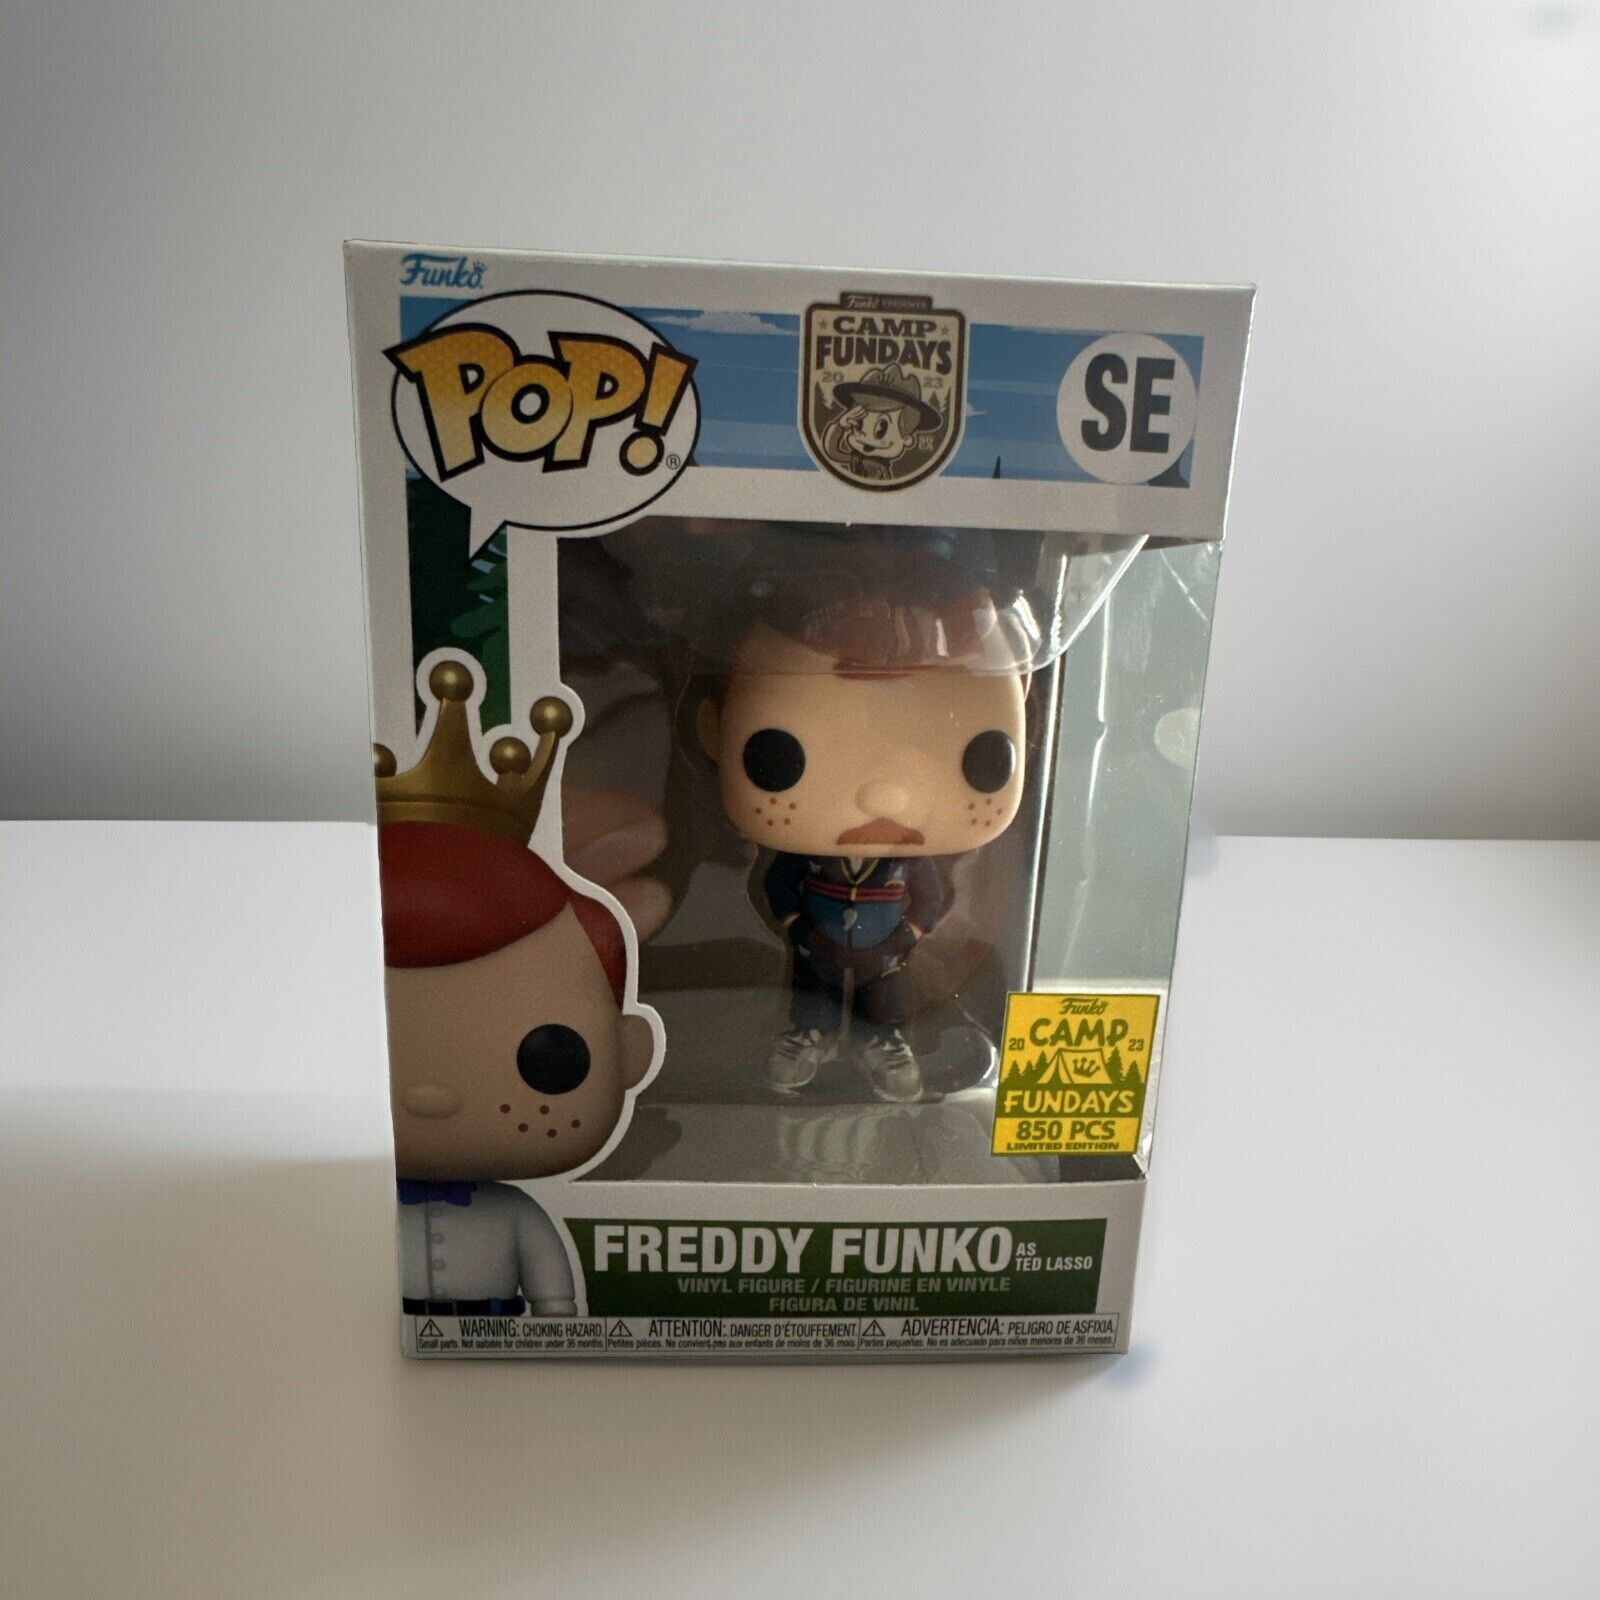 2023 Funko POP Camp Fundays Freddy Funko as Ted Lasso SE Limited Edition of 850